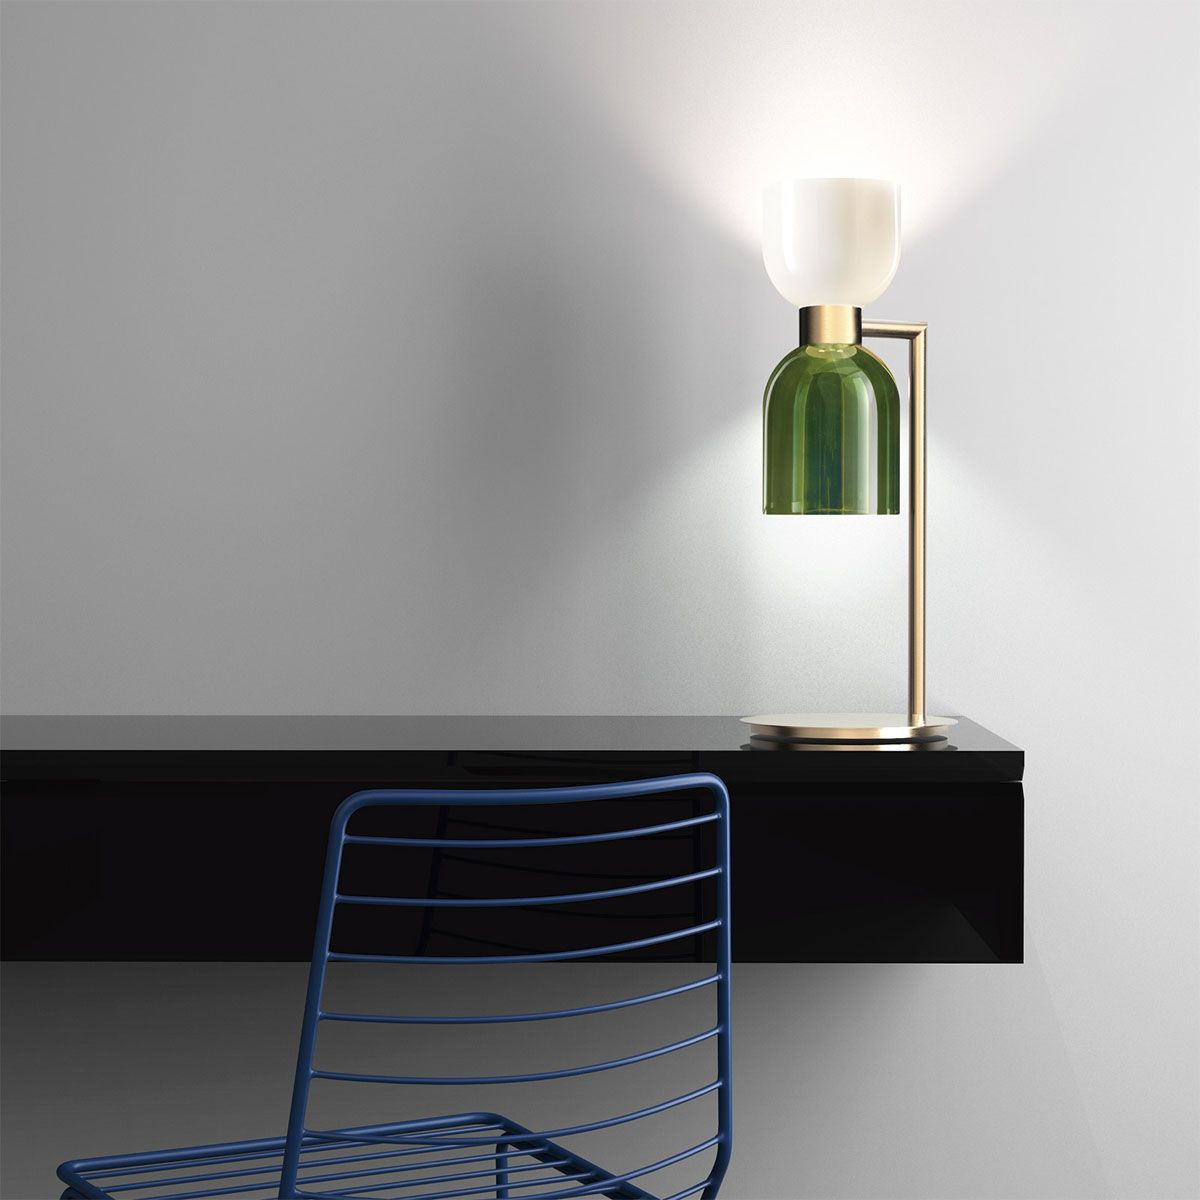 Table lamp CATERINA by ITALAMP